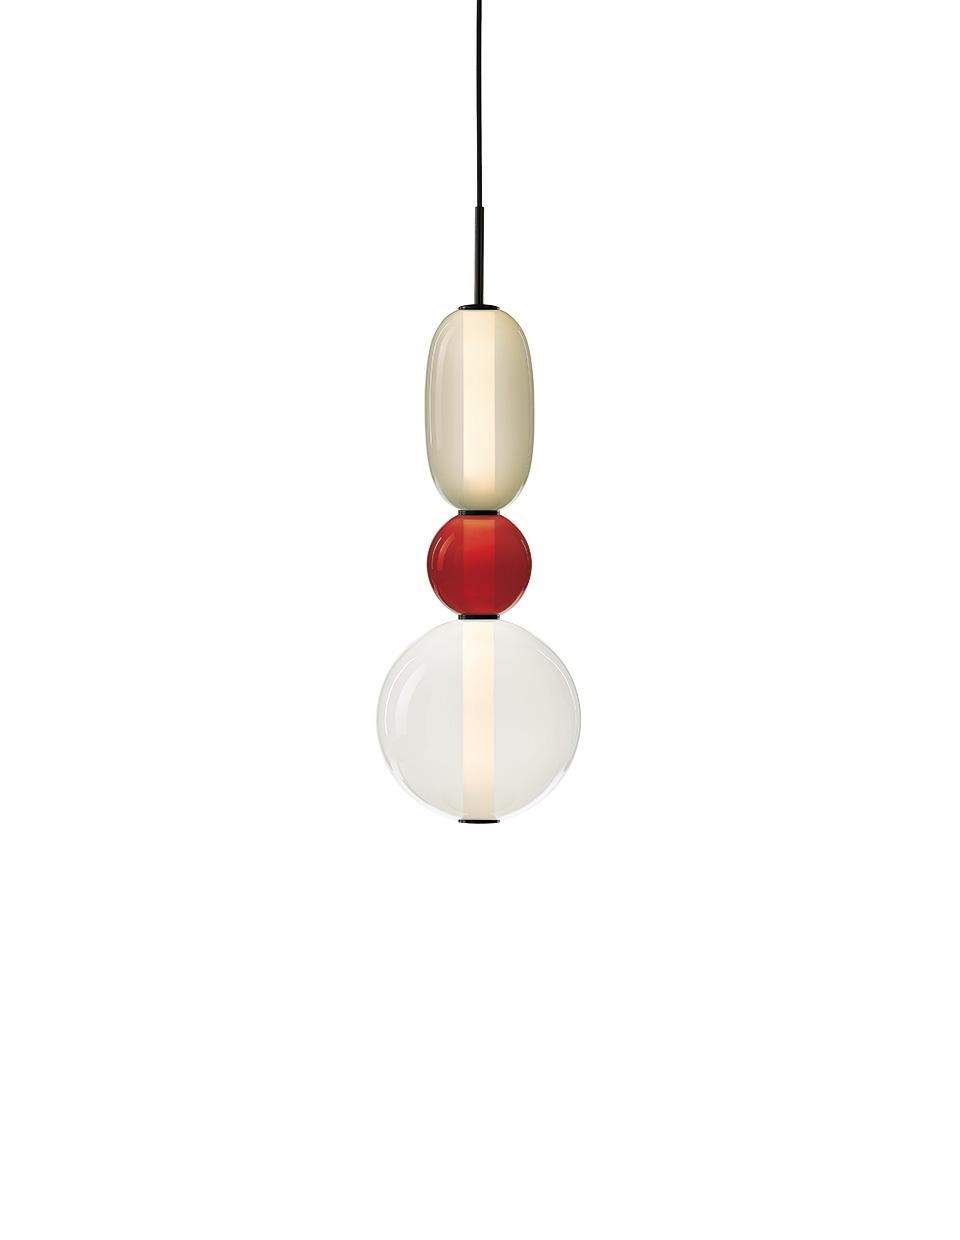 Contemporary blown crystal glass pendant - pebbles by Boris Klimek for Bomma

Pebbles are reminders of exceptional moments or favorite places. Their diverse shapes and colors inspired BOMMA’s playful collection that invites you to express your